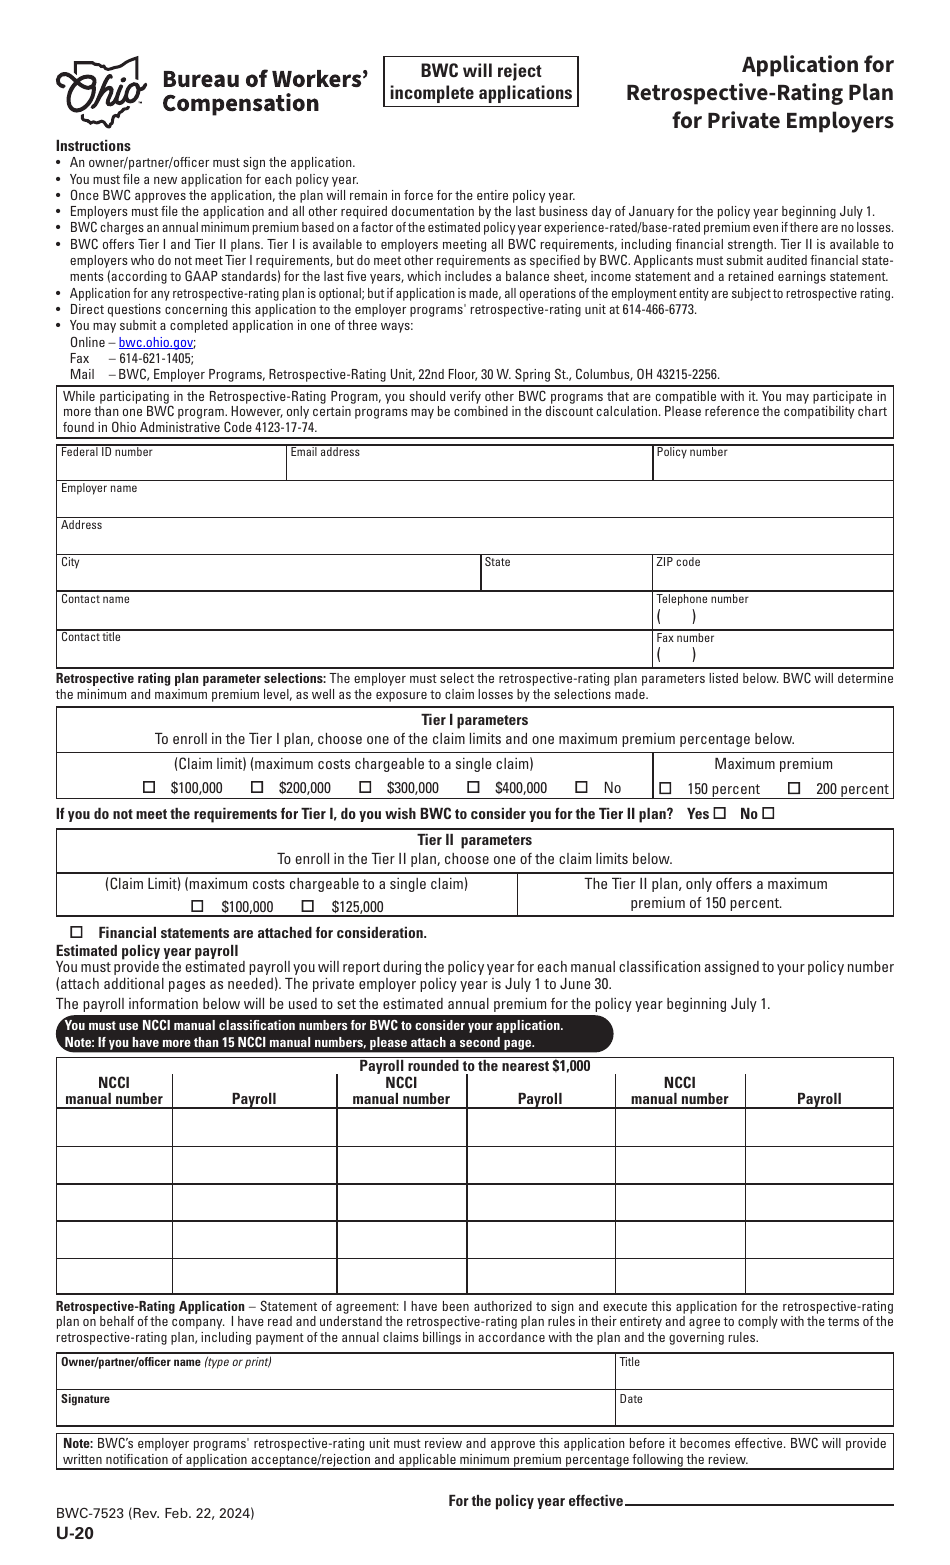 Form U-20 (BWC-7523) Application for Retrospective-Rating Plan for Private Employers - Ohio, Page 1